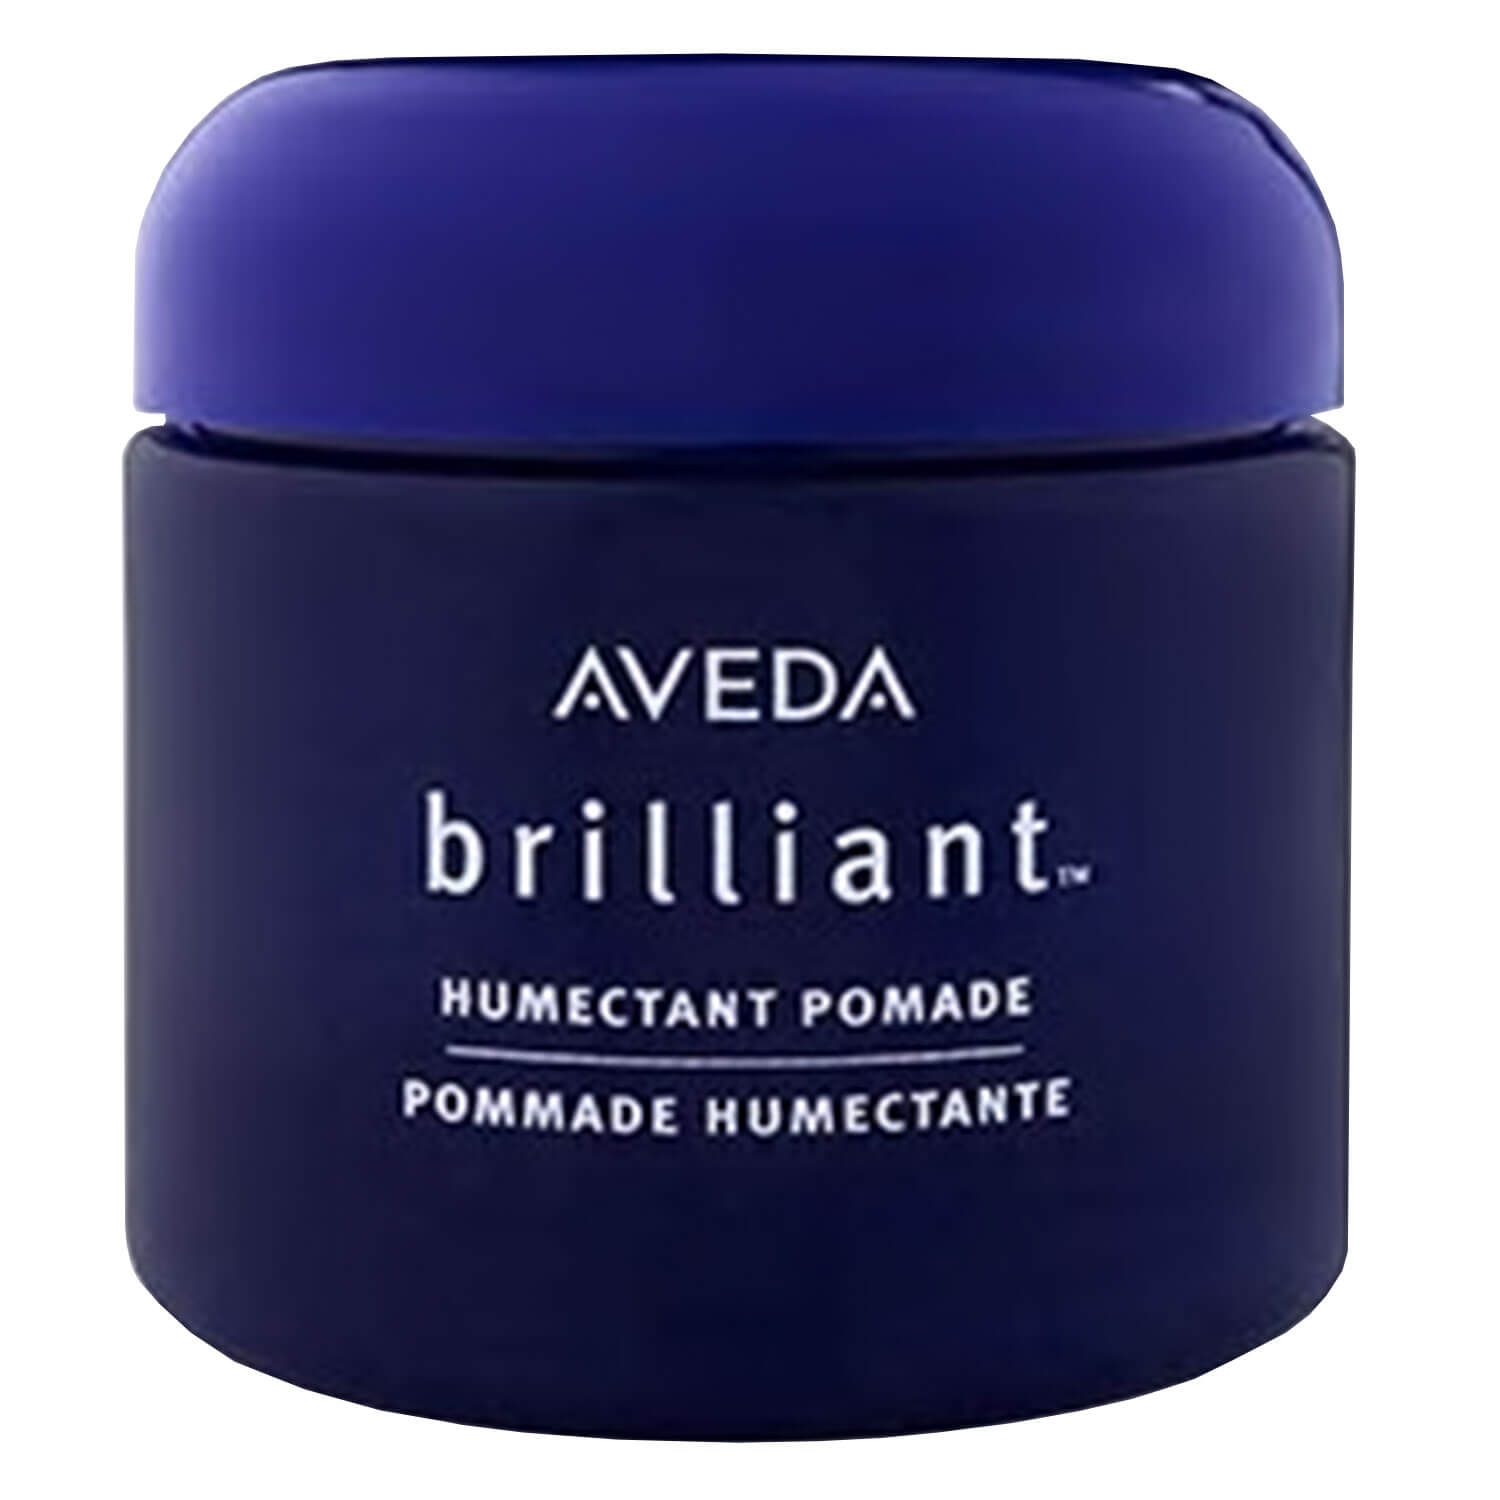 Product image from brilliant - humectant pomade